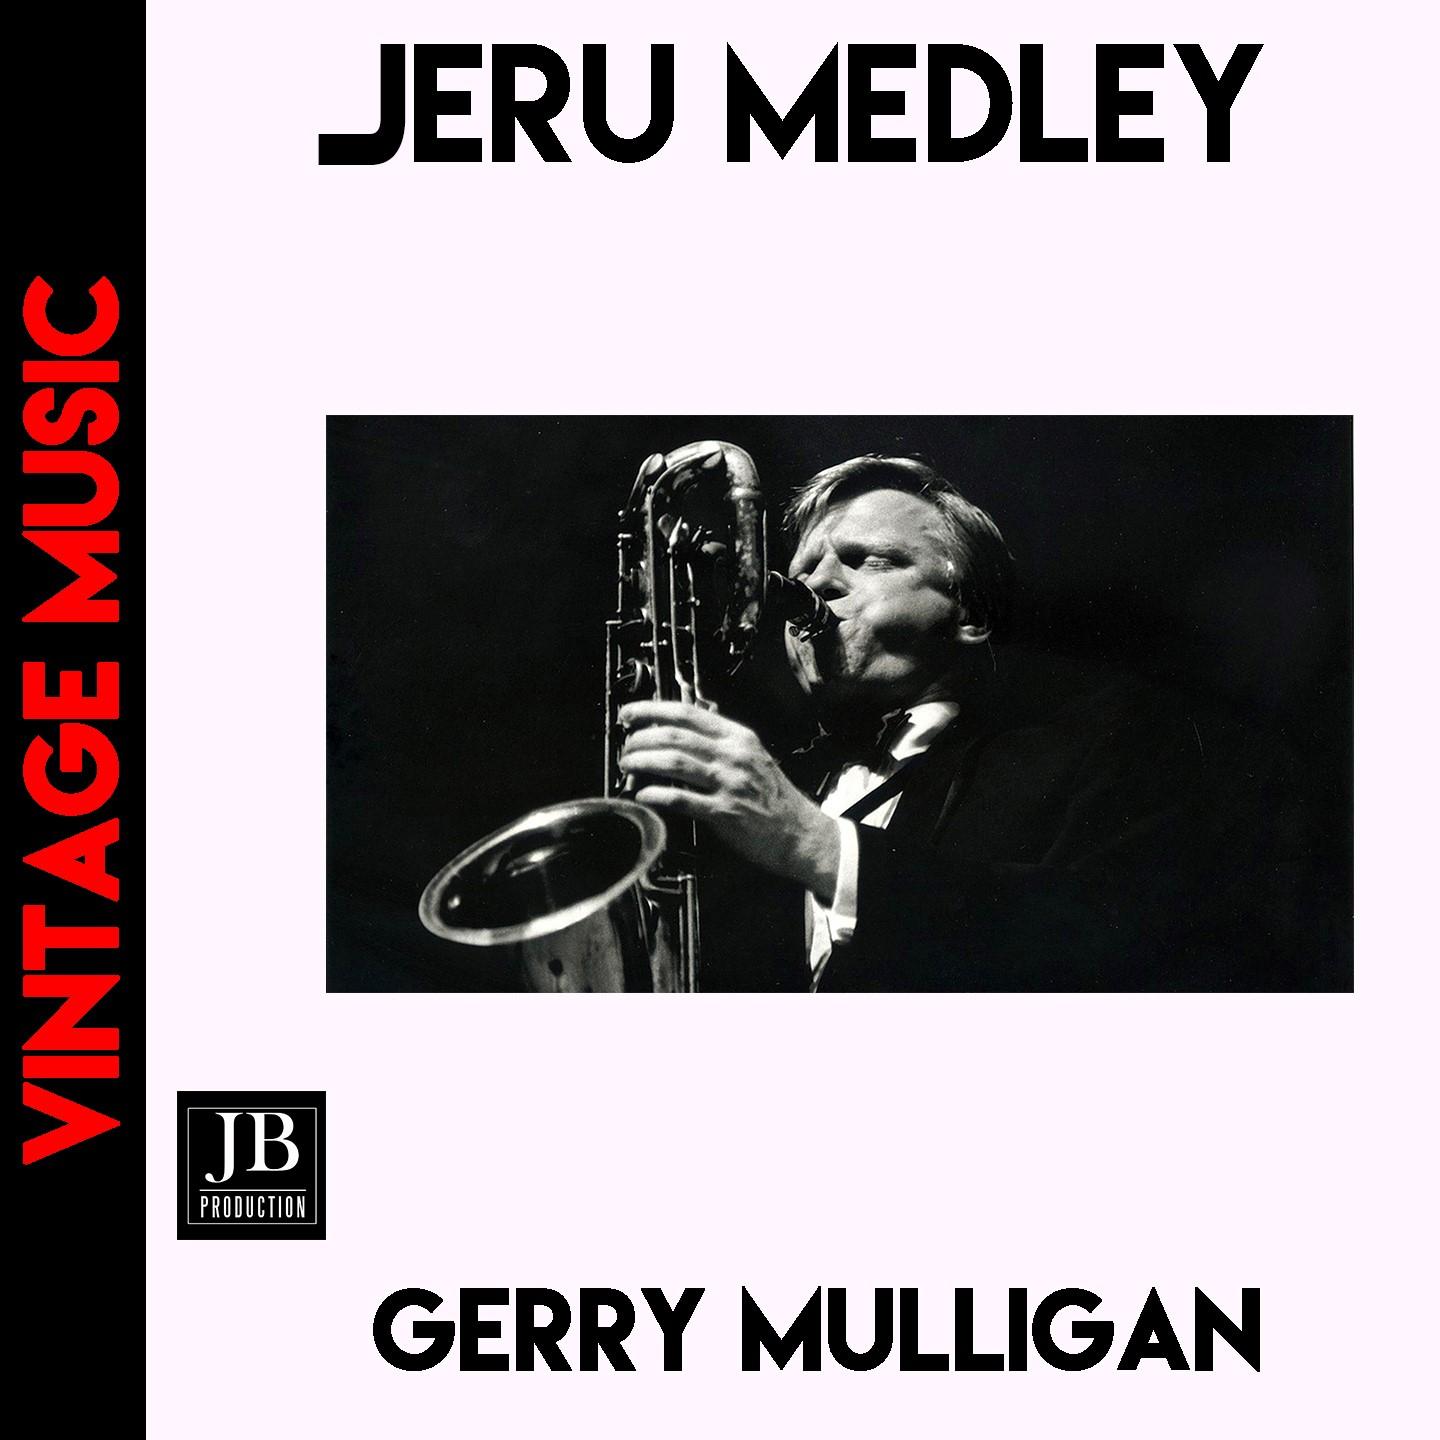 Jeru Medley: Capricious / Here I'll Stay / Inside Impromptu / You've Come Home / Get Out Of Town / Blue Boy / Lonely Town